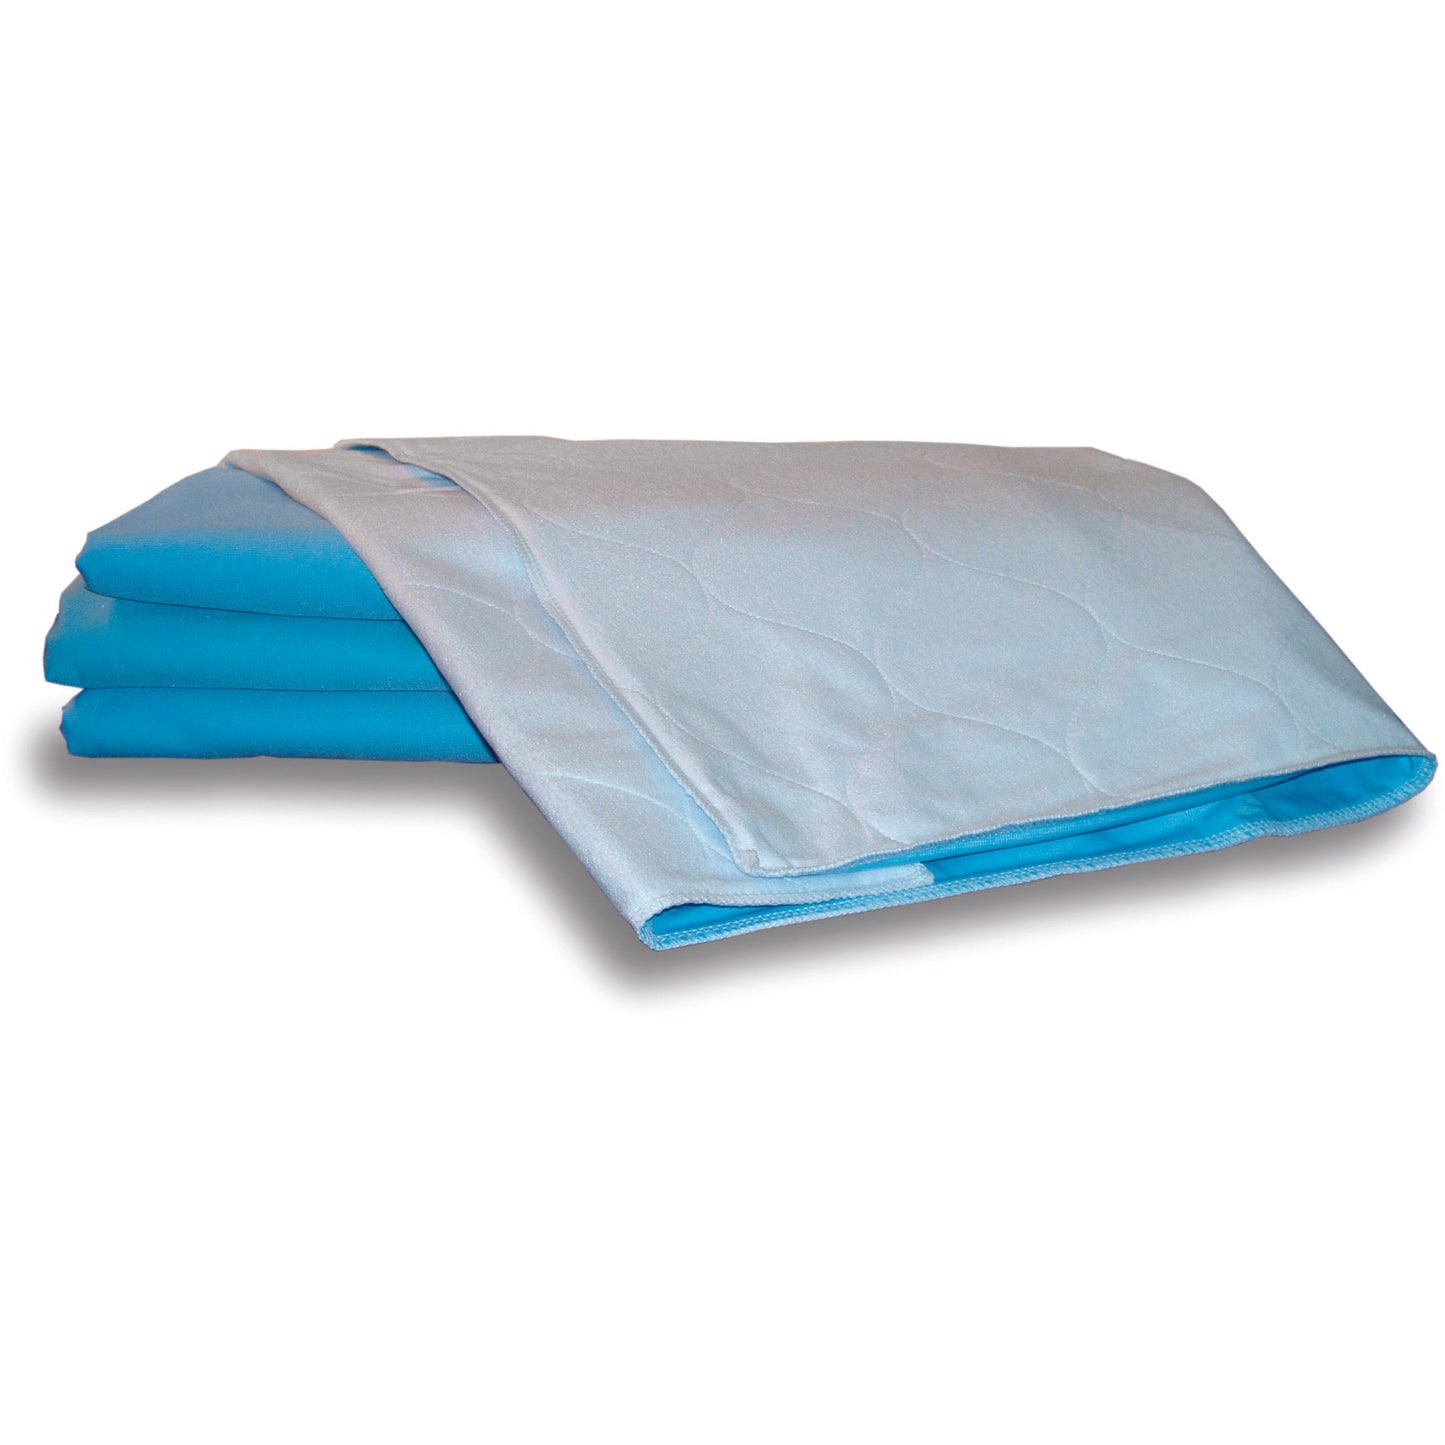 Dermacare Bedpad With Tucks - 85x90cm - 3ltr Absorbency